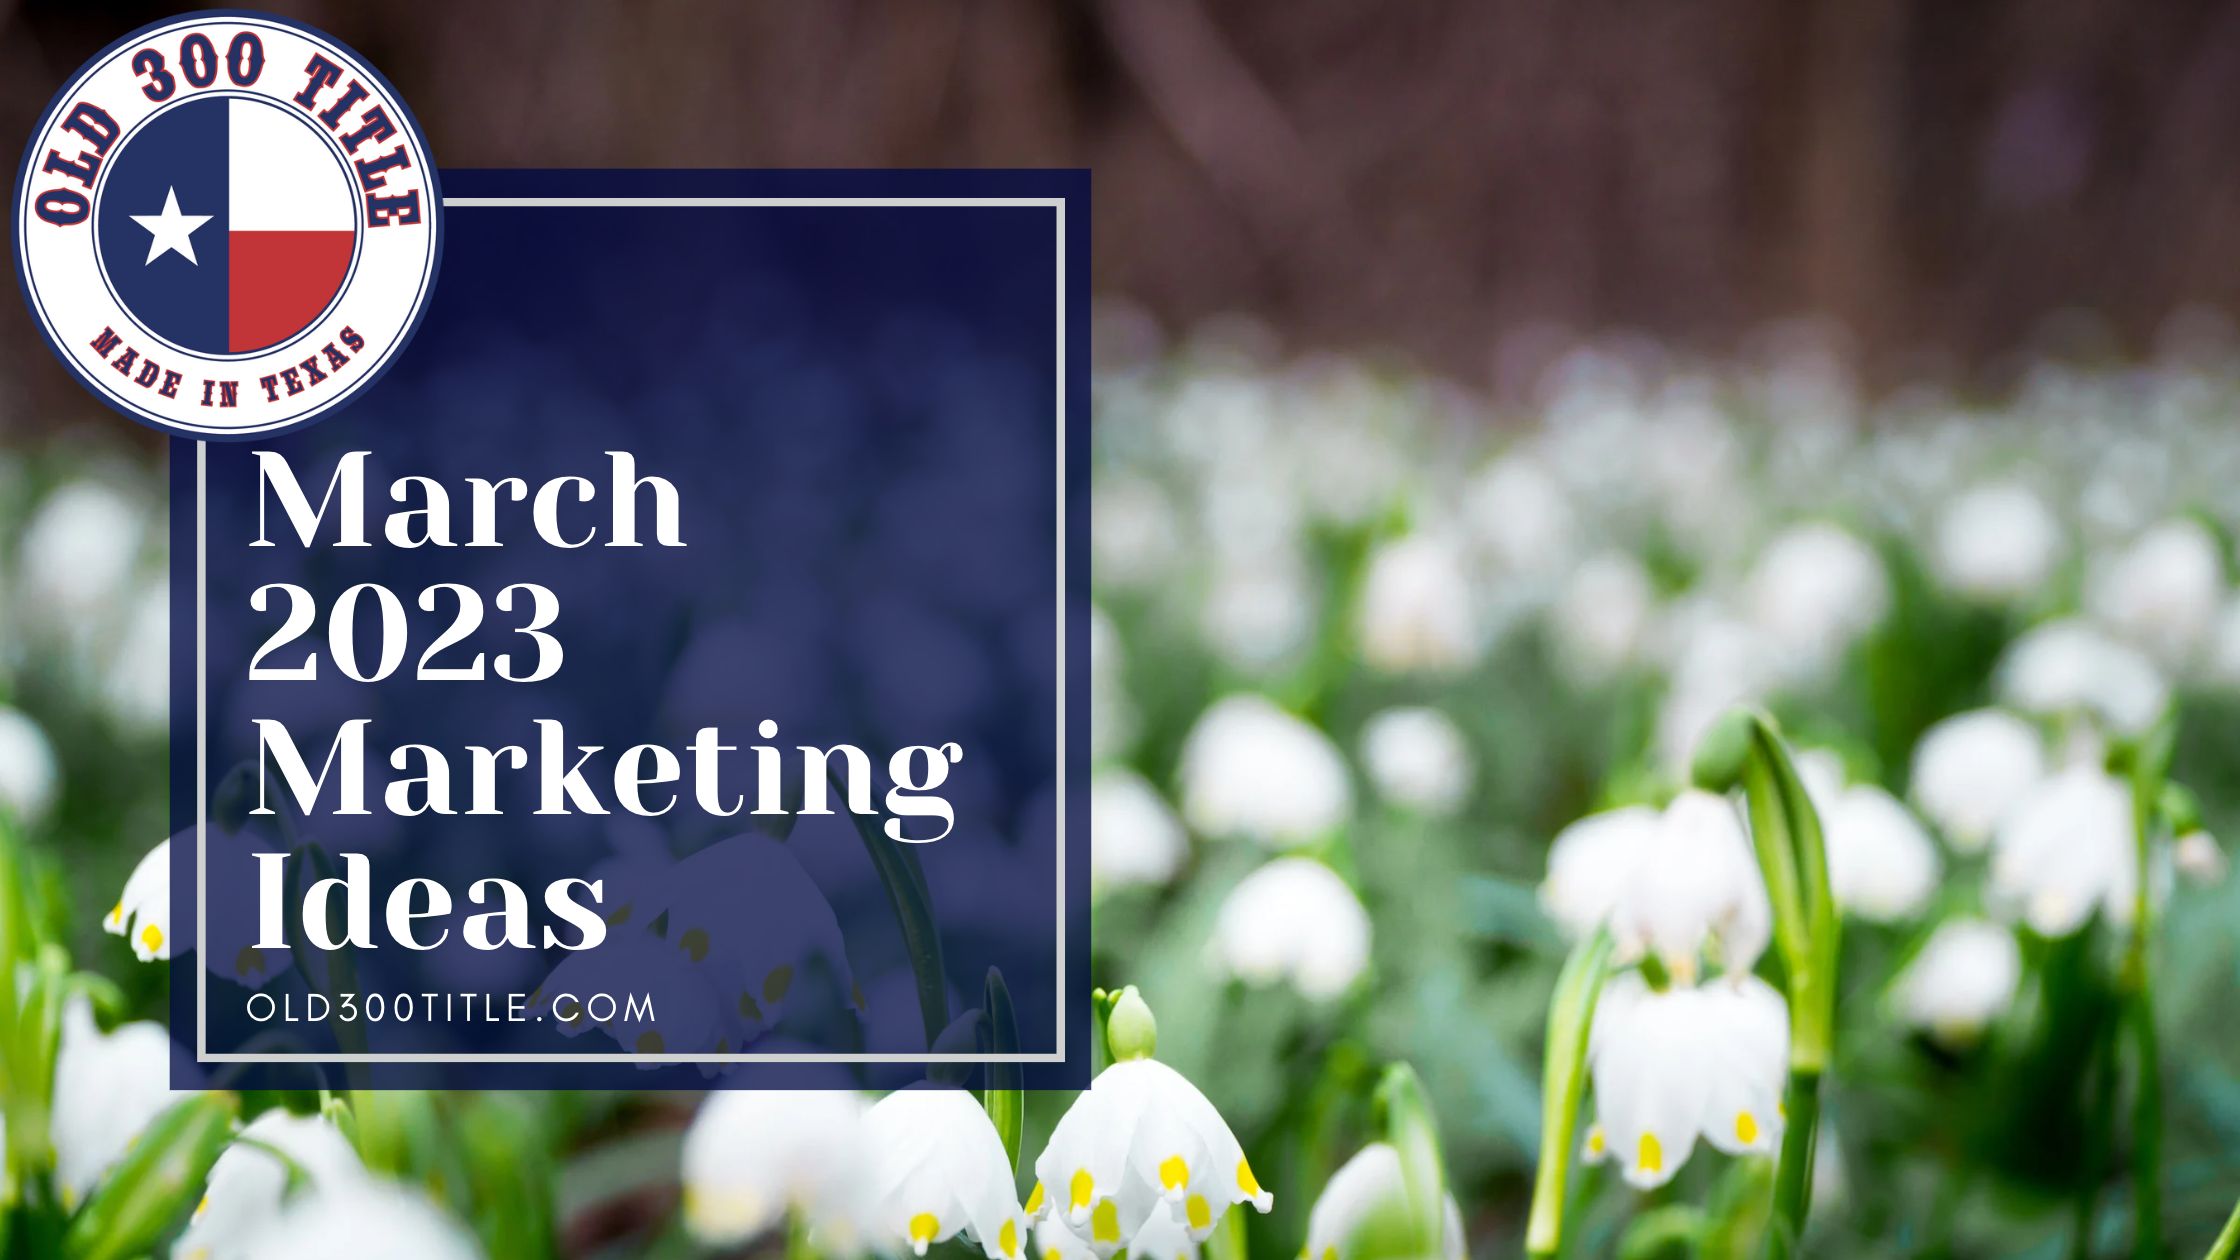 Real Estate Marketing Ideas for March 2023